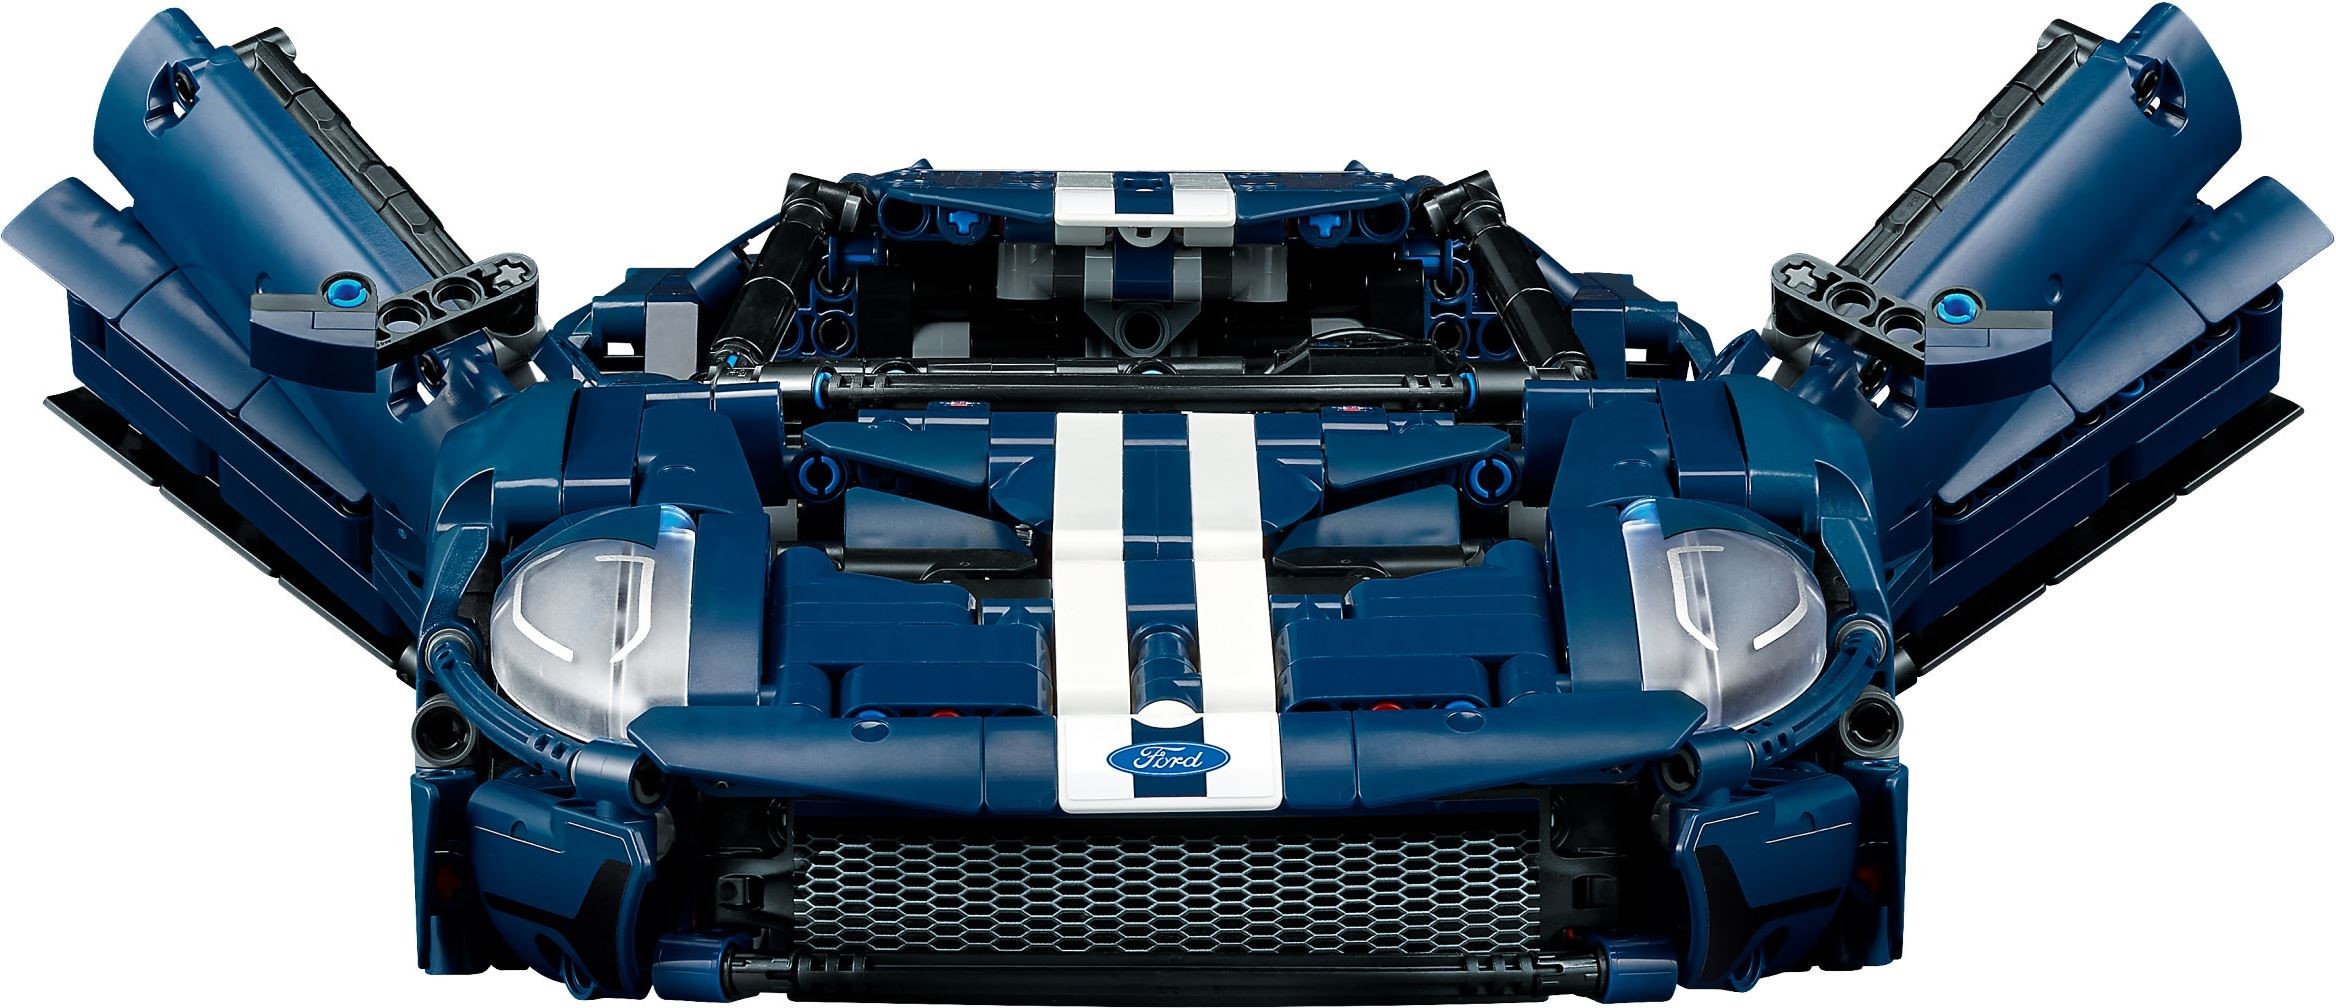 2022 Ford GT Lego Technic debuts with 1,466 pieces, moving pistons